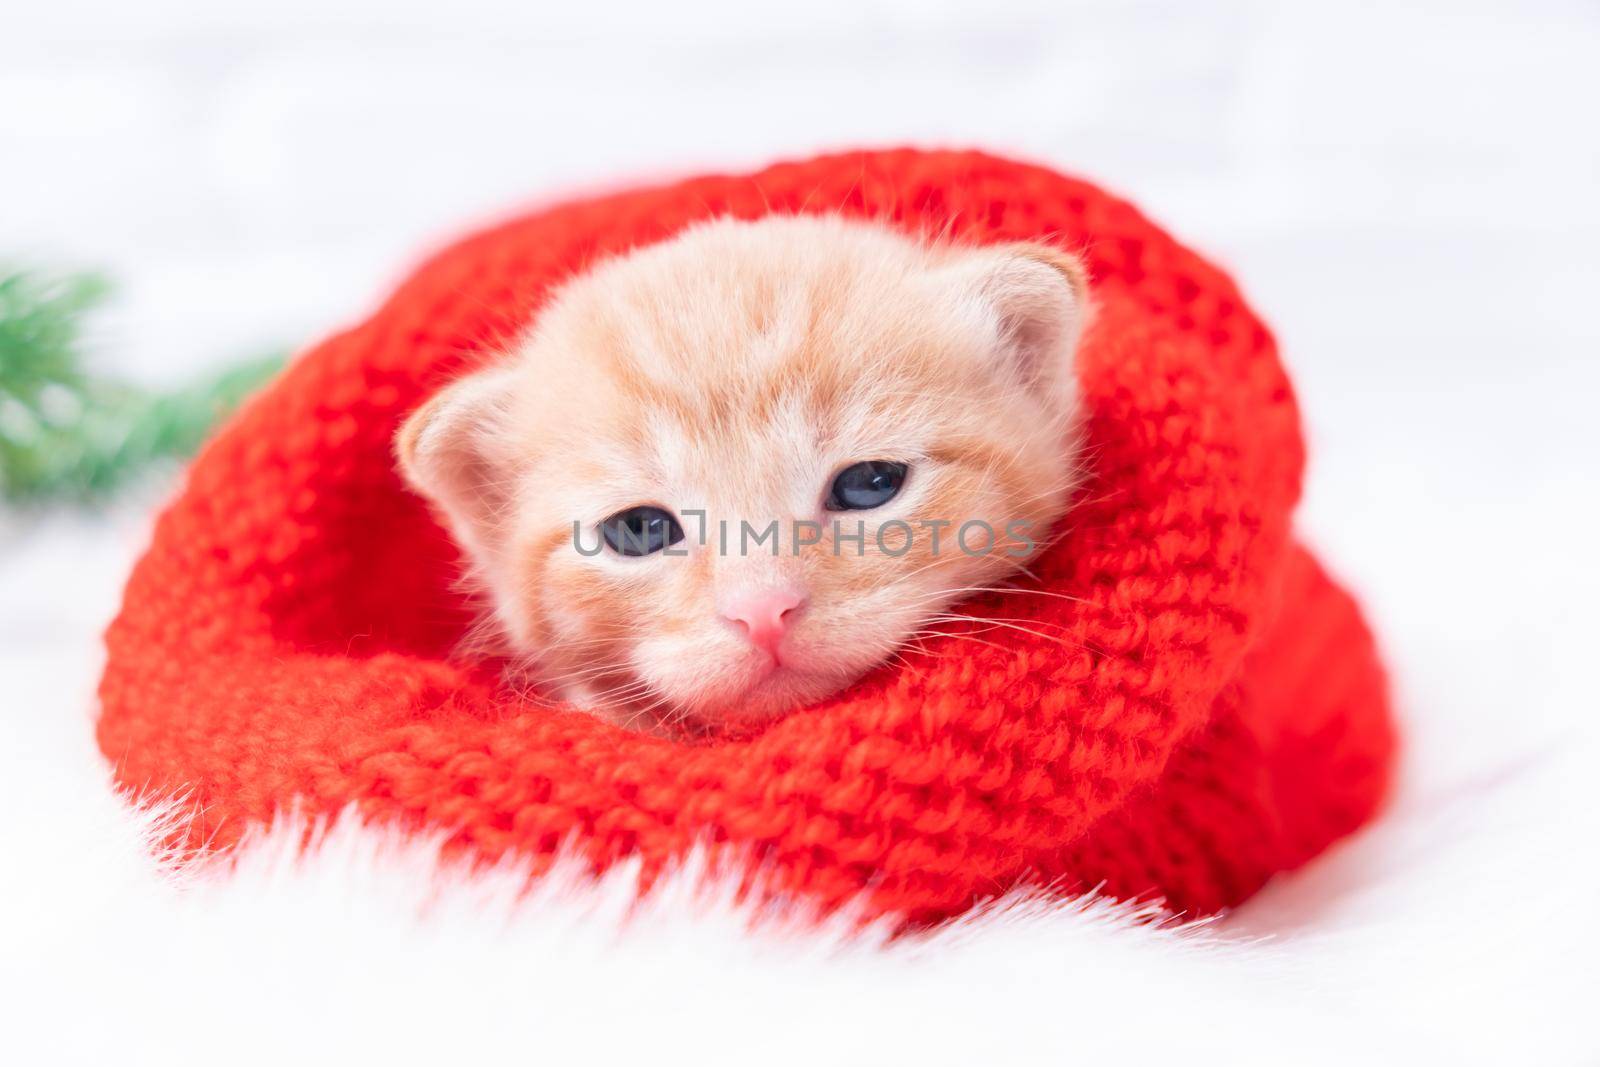 Small Christmas ginger kitten is sweetly basking and looking at the camera in a knitted red Santa hat. Soft and cozy with a Christmas tree. Christmas, home comfort and new year holidays concept.